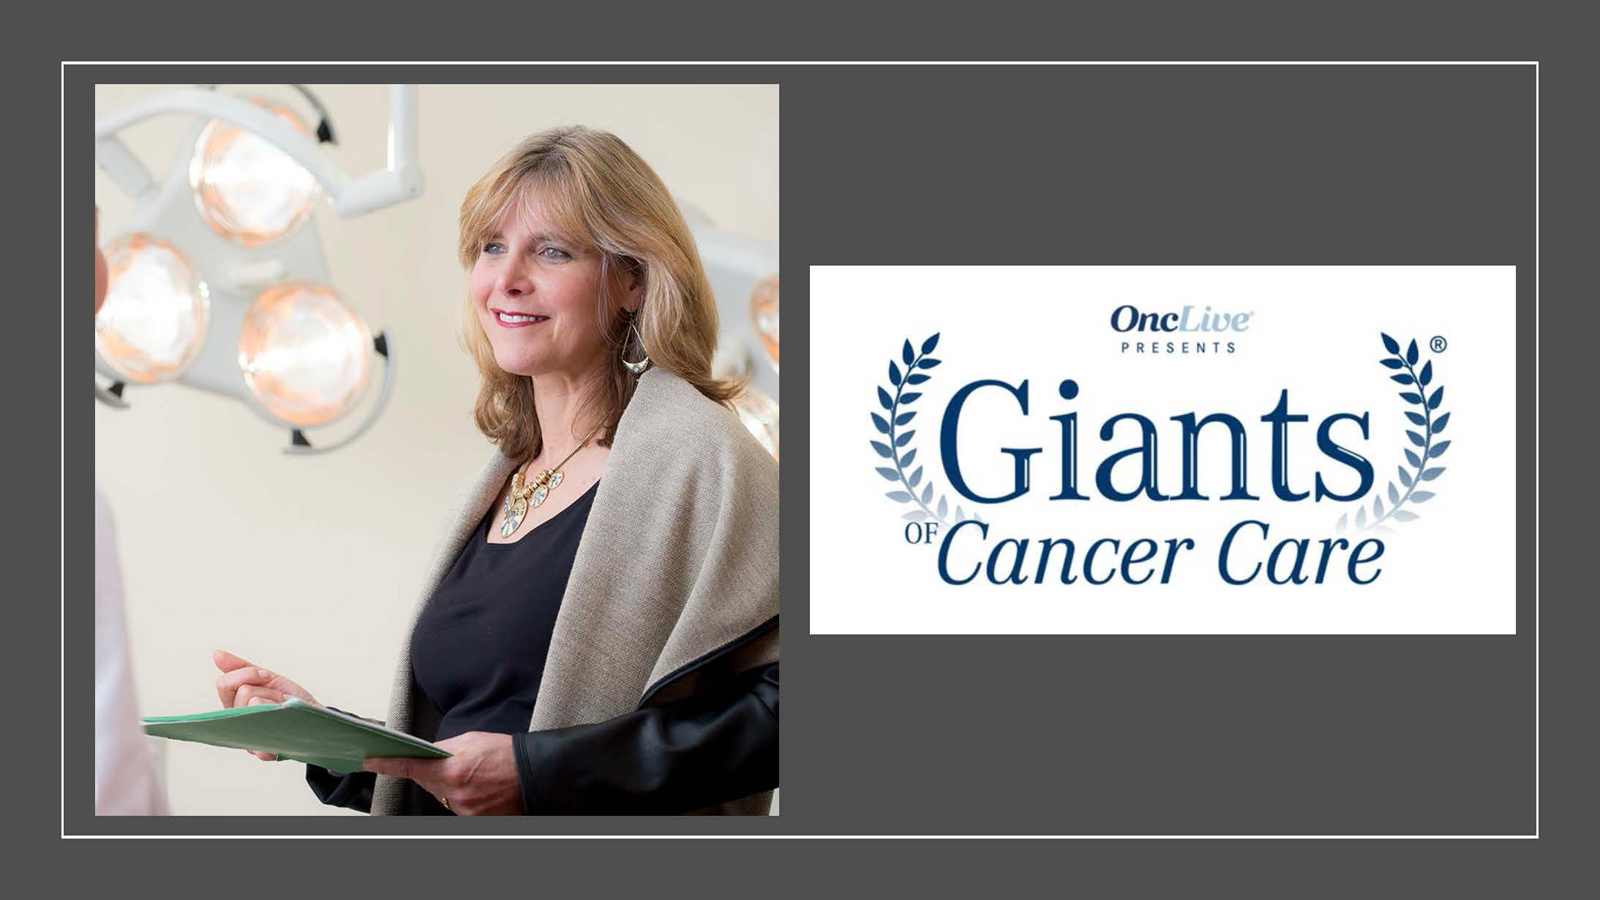 Laura J Esserman MD MBA Is The Onclive 2018 Giant Of Cancer Care In Cancer Diagnostics